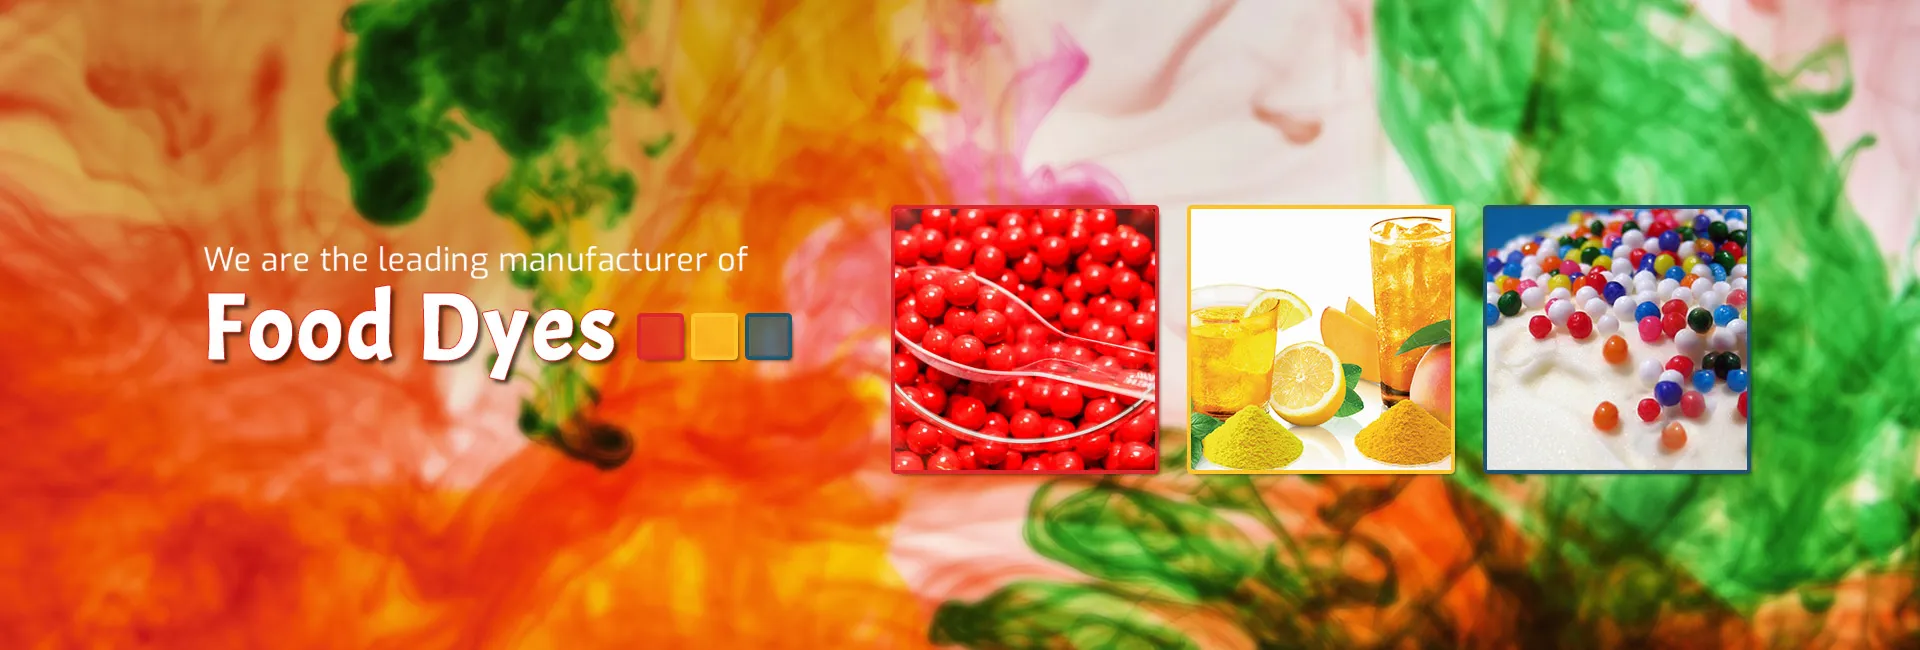 Food Dyes Manufacturer & Suppliers in USA